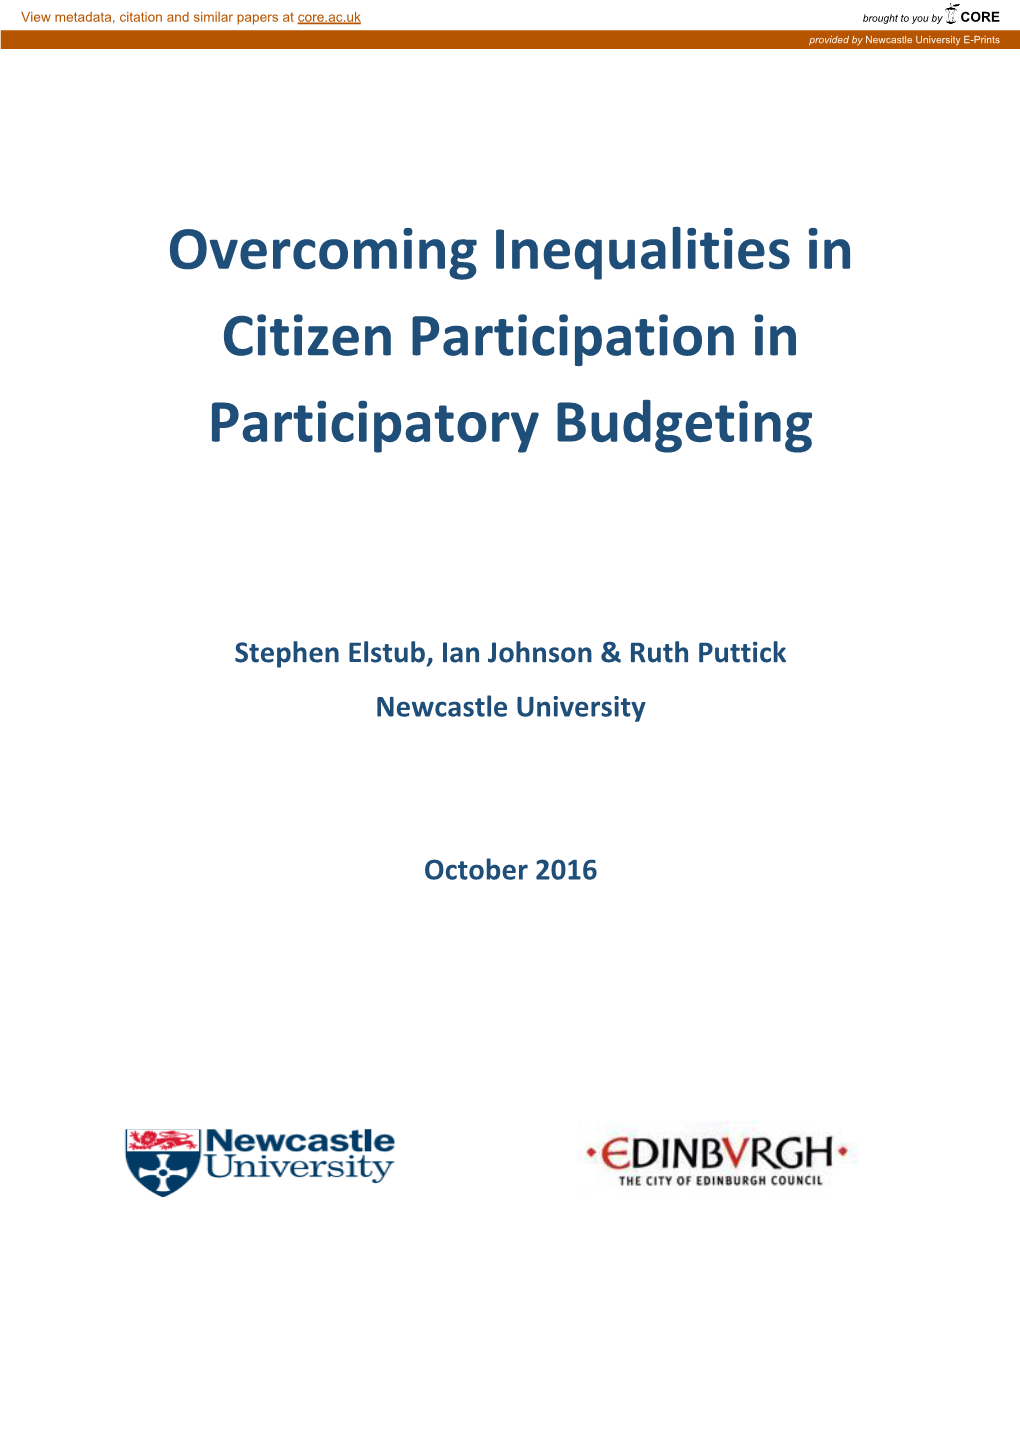 Overcoming Inequalities in Citizen Participation in Participatory Budgeting